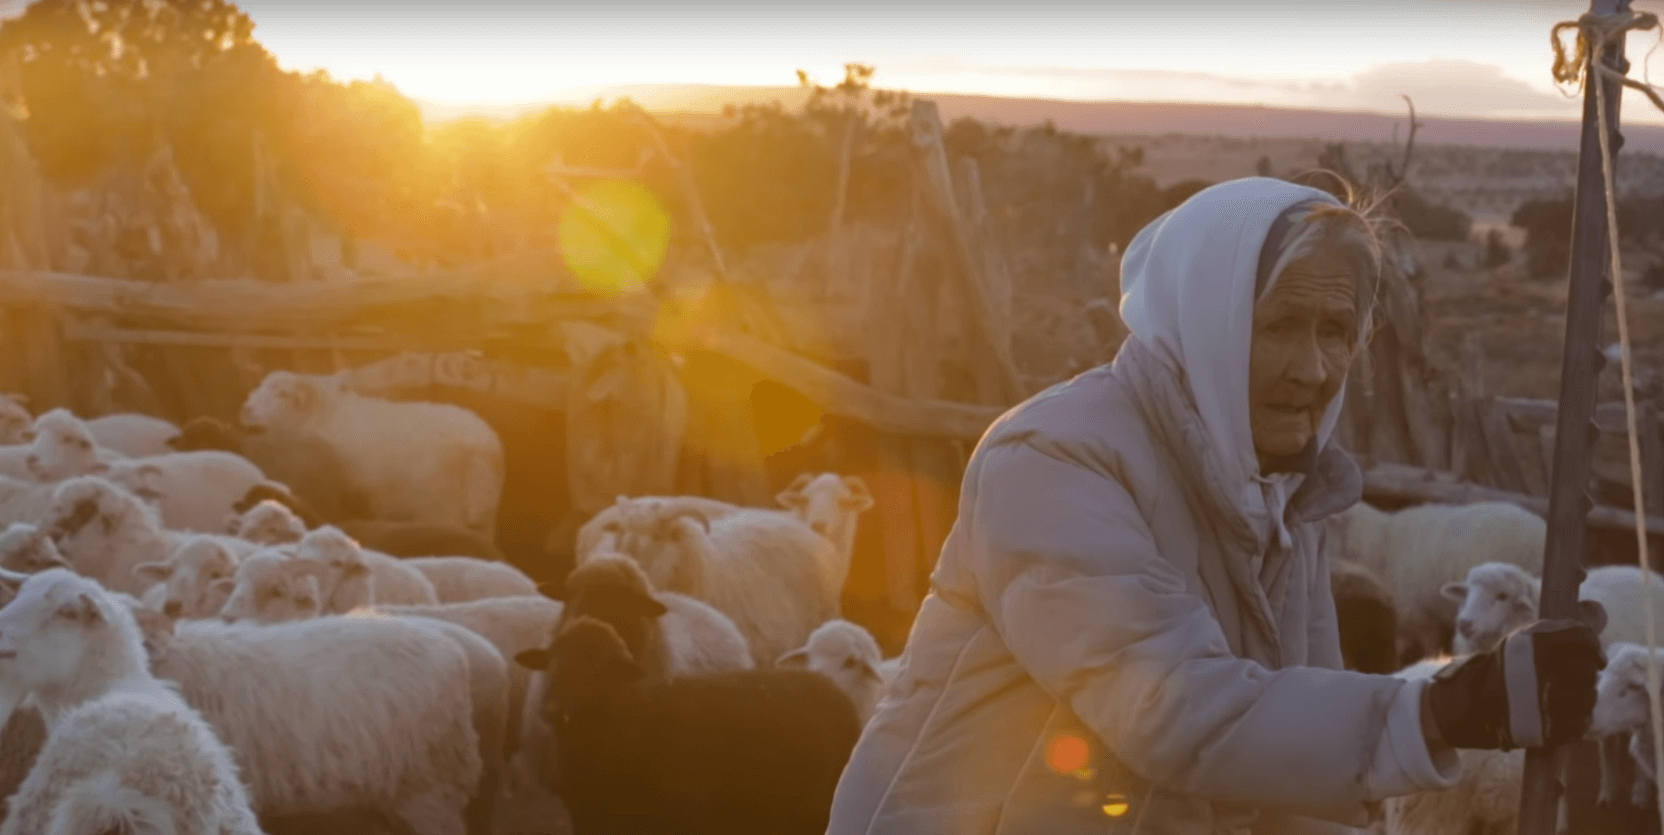 An old woman wearing a jacket and a hoodie is grabbing a fence, behind her there are goats in an open space, the flare of the sun reflects on the camera